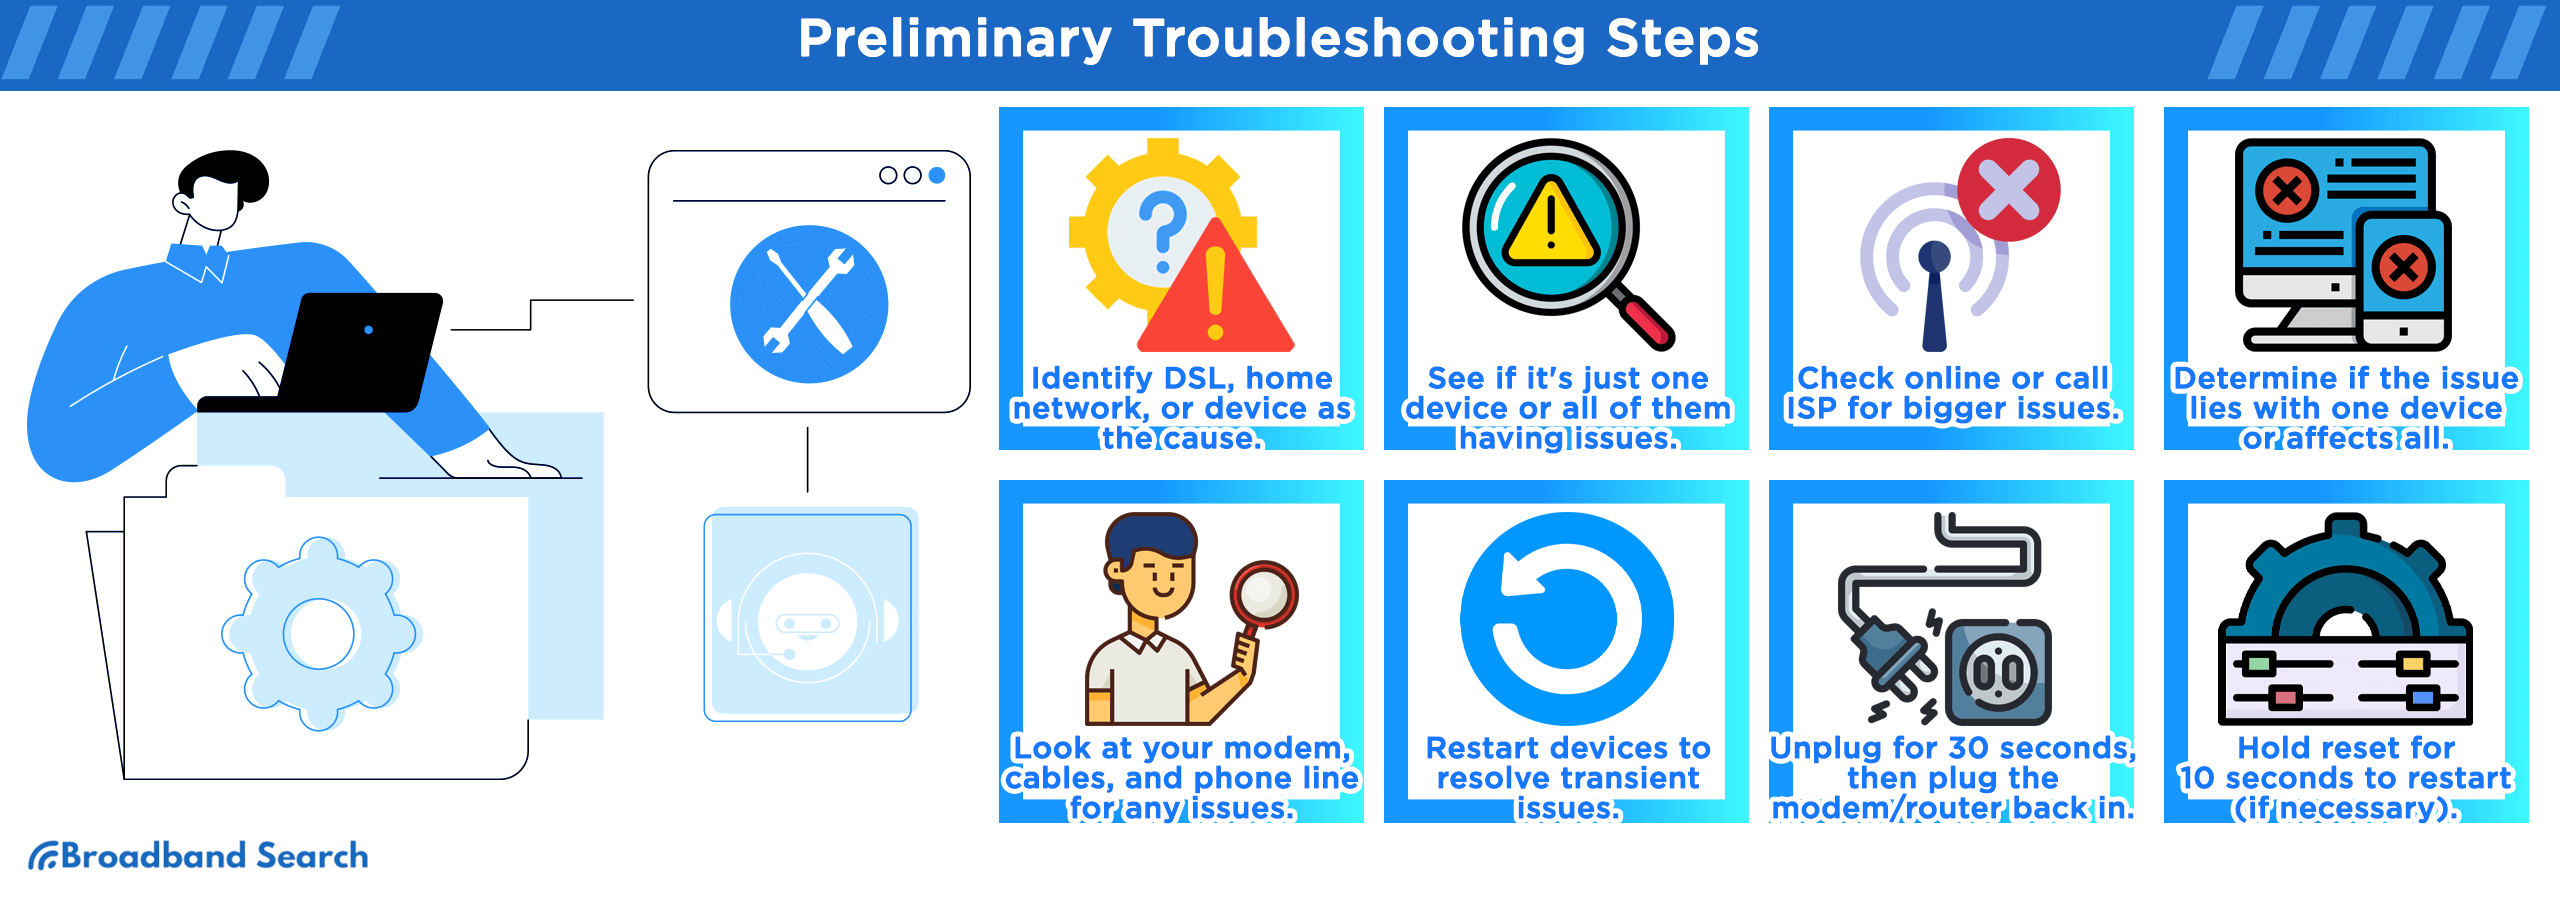 Preliminary Troubleshooting steps